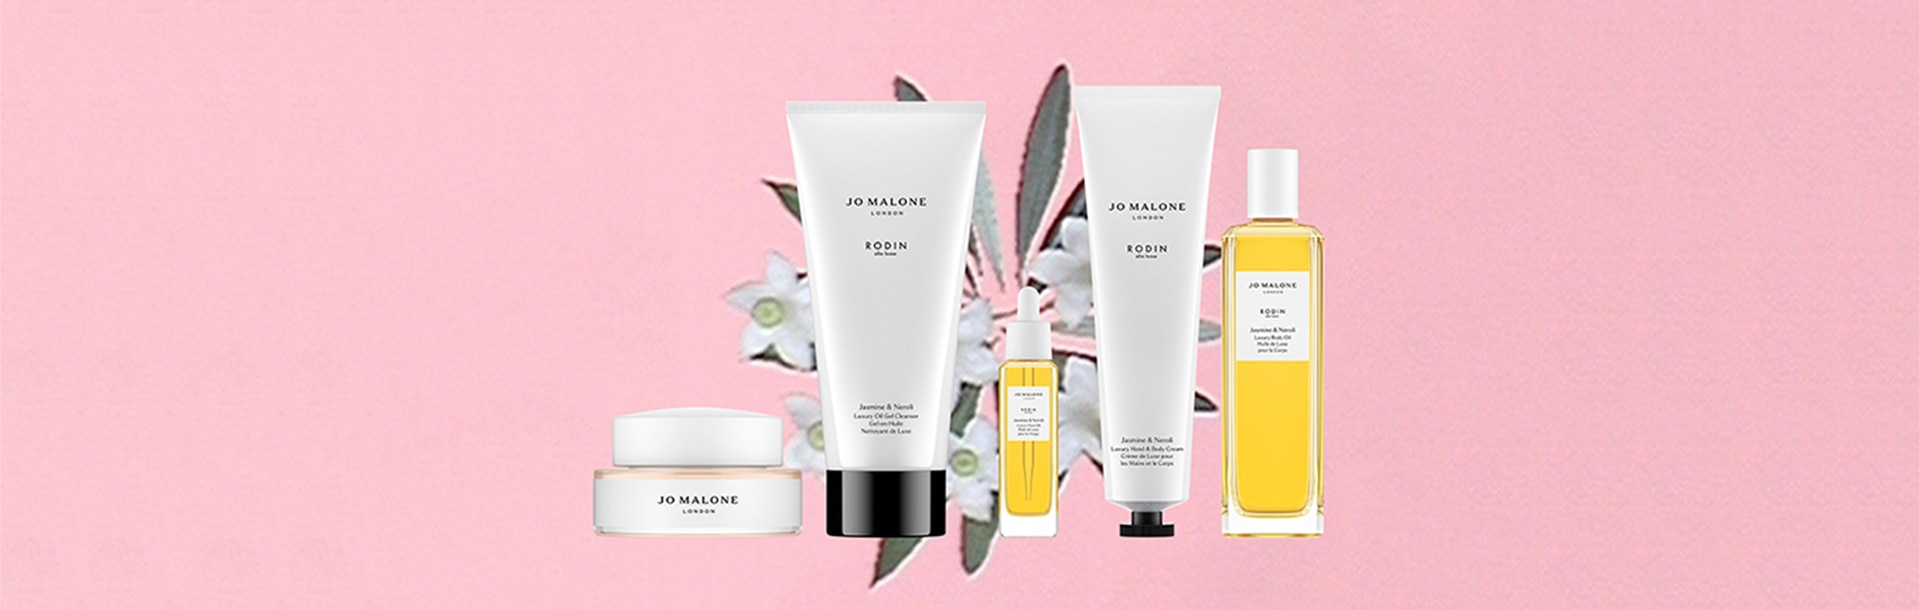 rodin collaboration, pink background with line up of 5 skincare products